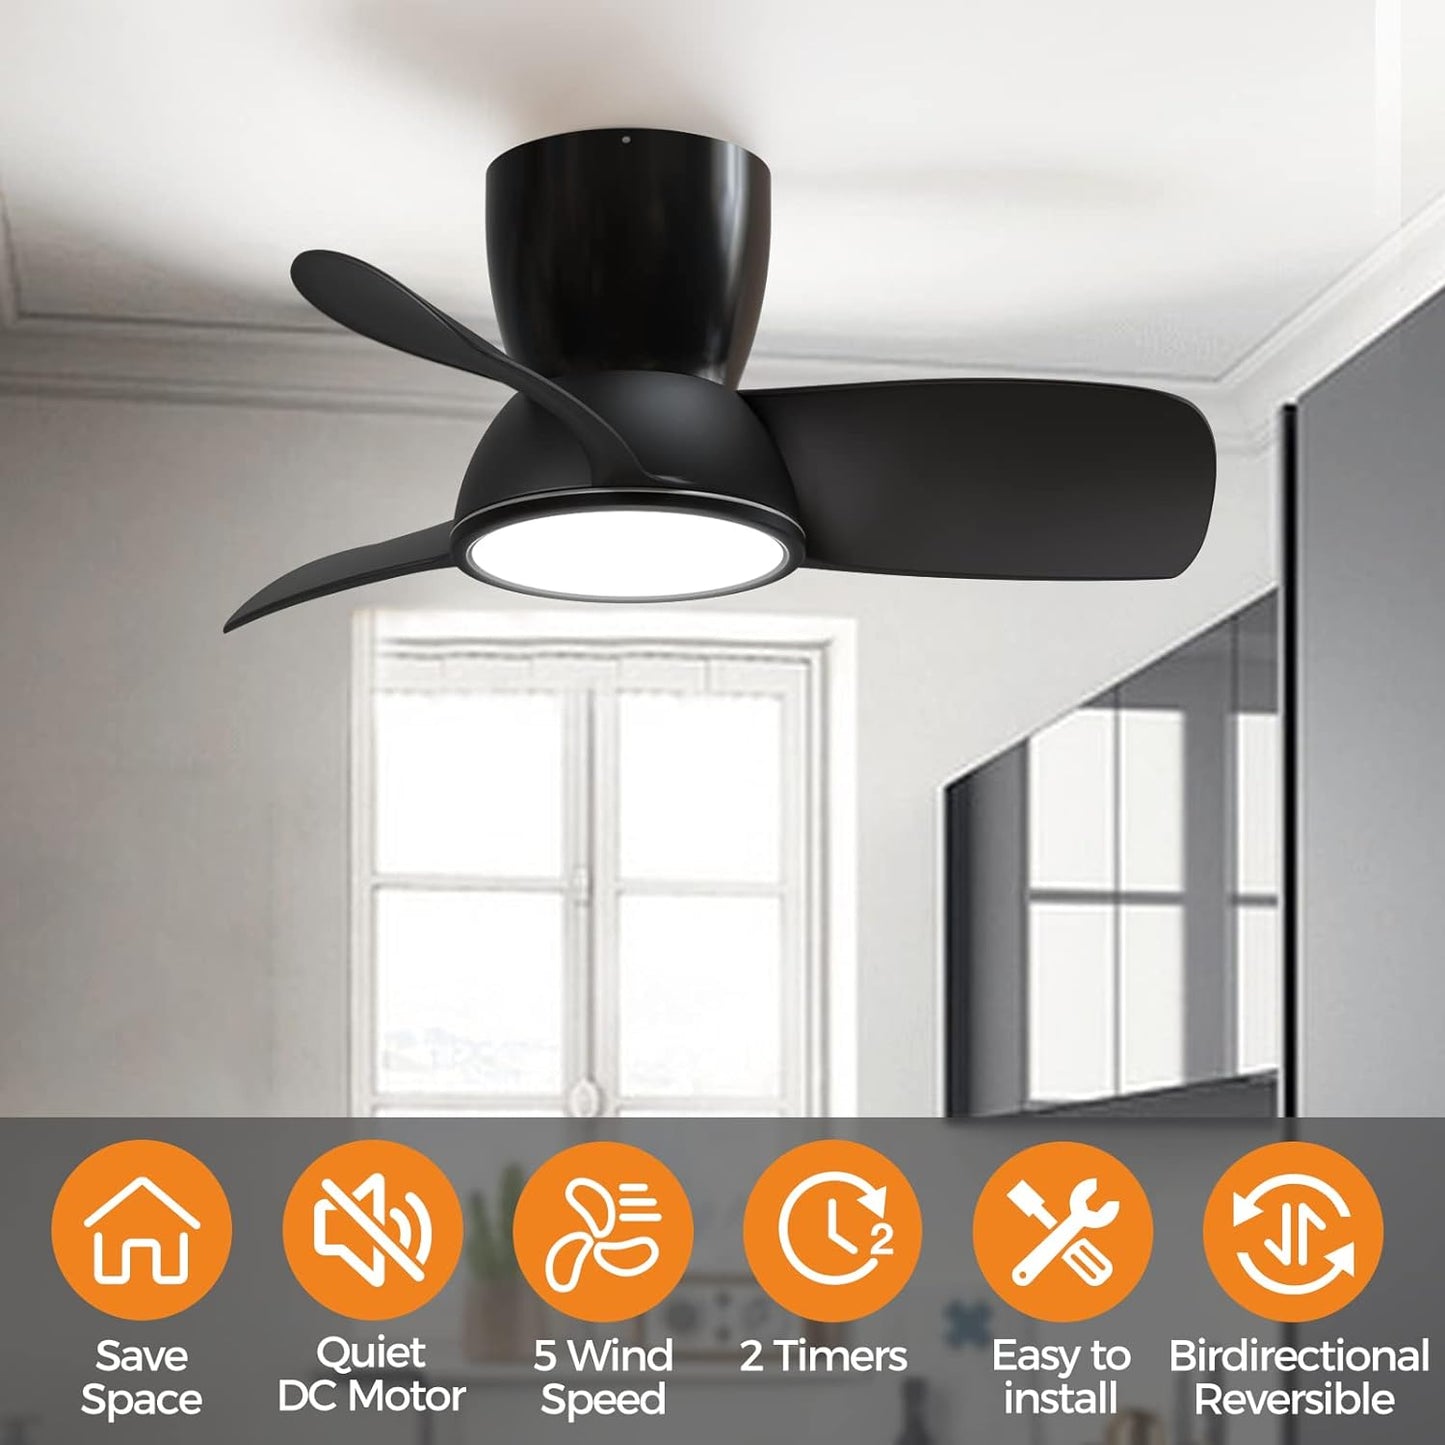 slochi Quiet Ceiling Fan with Lights, 32 inches Large Air Volume Remote Control Ceiling Fan Adjustable Color Temperature Flush Mount Ceiling Fan for Kitchen Bedroom Dining room Patio (Black, 32 inch)